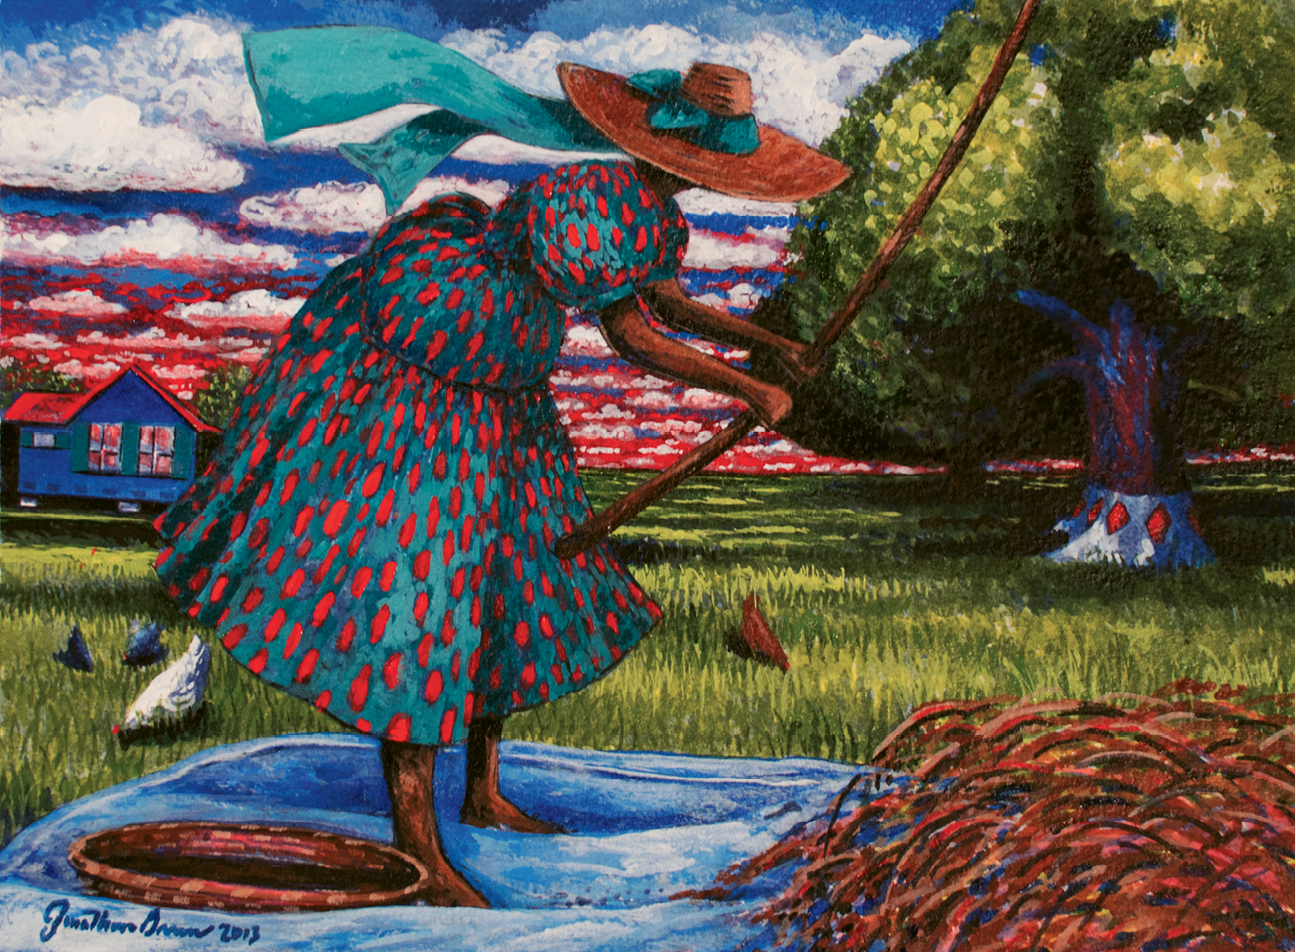 Hulling Home Rice (acrylic on watercolor, 11 X 14 1/2 inches, 2012)